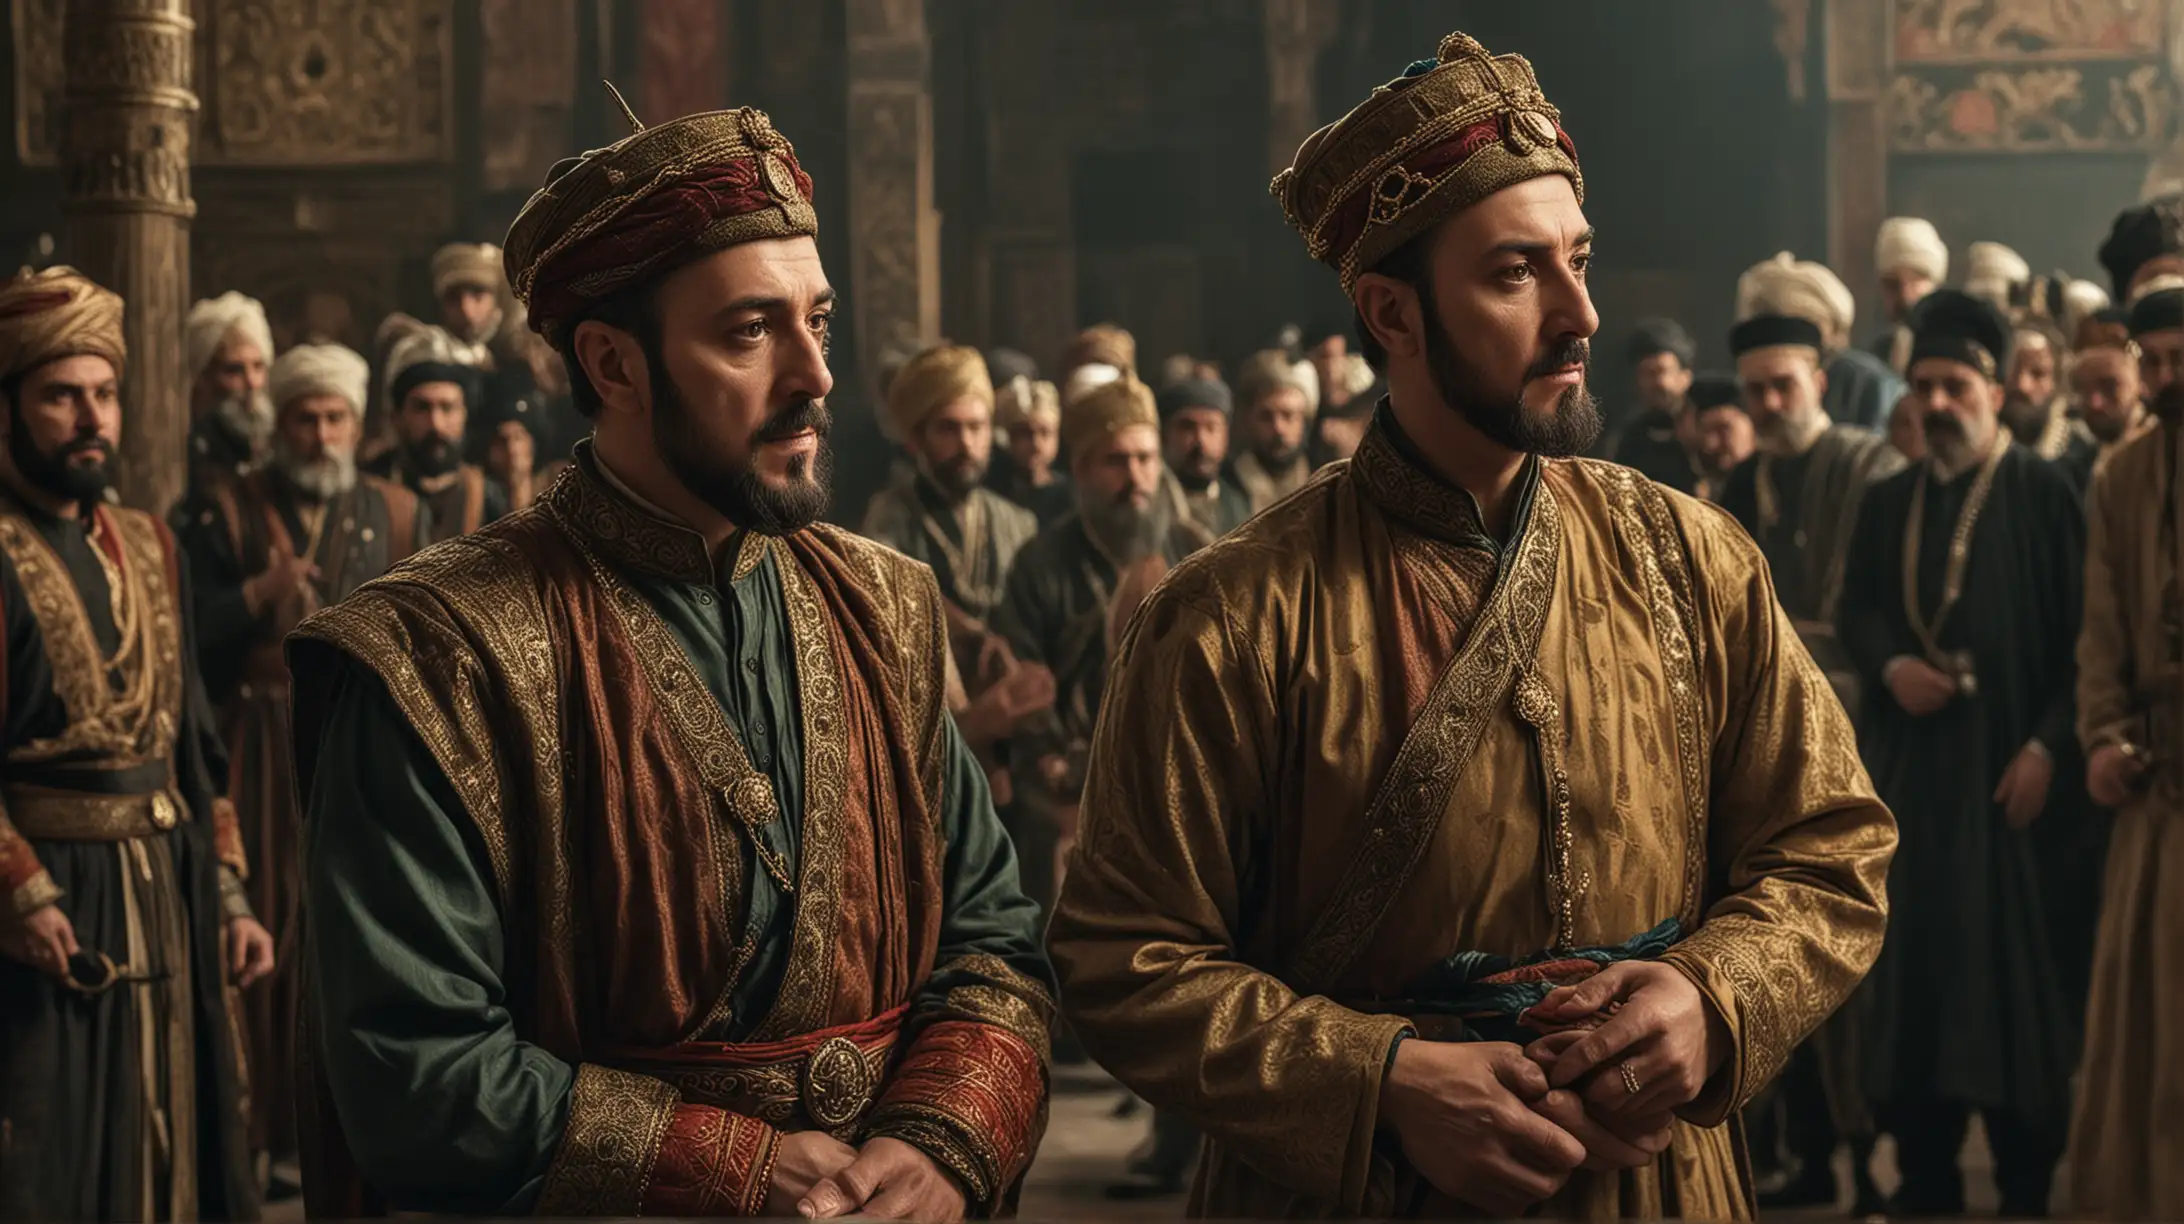 Sultan Suleiman and his son Mustafa lock eyes in a tense confrontation, their faces mere inches apart, amidst the hushed whispers of the courtiers. The air is thick with anticipation as the two powerful figures stand on the brink of destiny, their conflicting ambitions and familial bonds hanging in the balance. In this charged moment, the weight of history bears down upon them, as father and son grapple with the fateful decision that will shape the course of the Ottoman Empire.
Hyper realistic